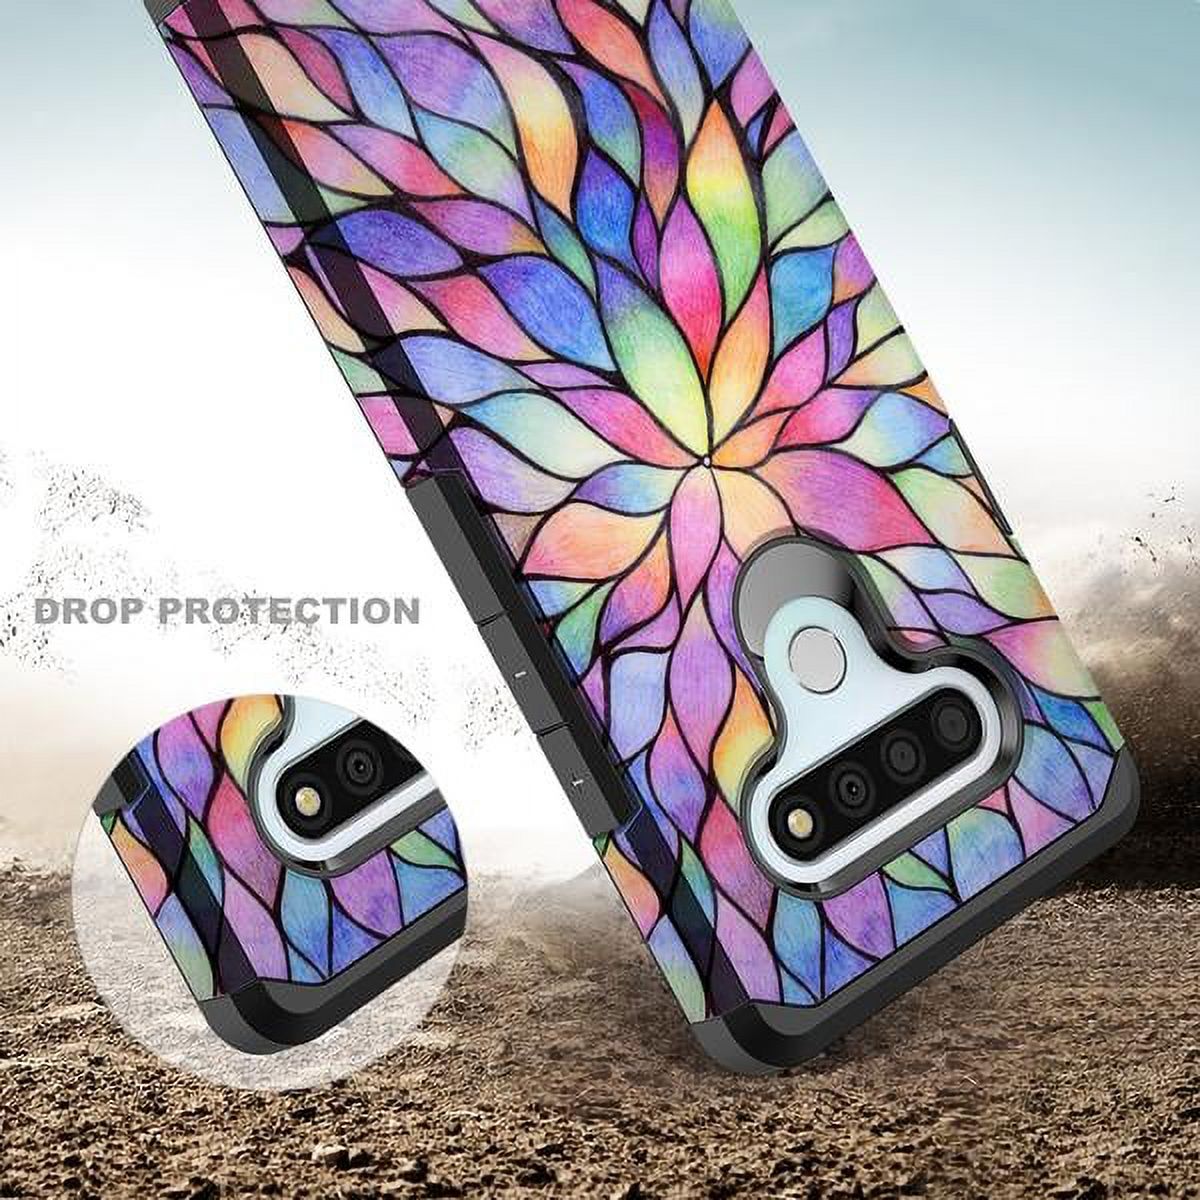 LG Stylo 6/LG Stylo 6 Plus Case Cover w/[ Temper Glass Screen Protector] Silicone Shock Proof Dual Layer Cute Girls Women Case Cover for LG Stylo 6/Stylo 6 Plus - Rainbow Flower - image 4 of 5